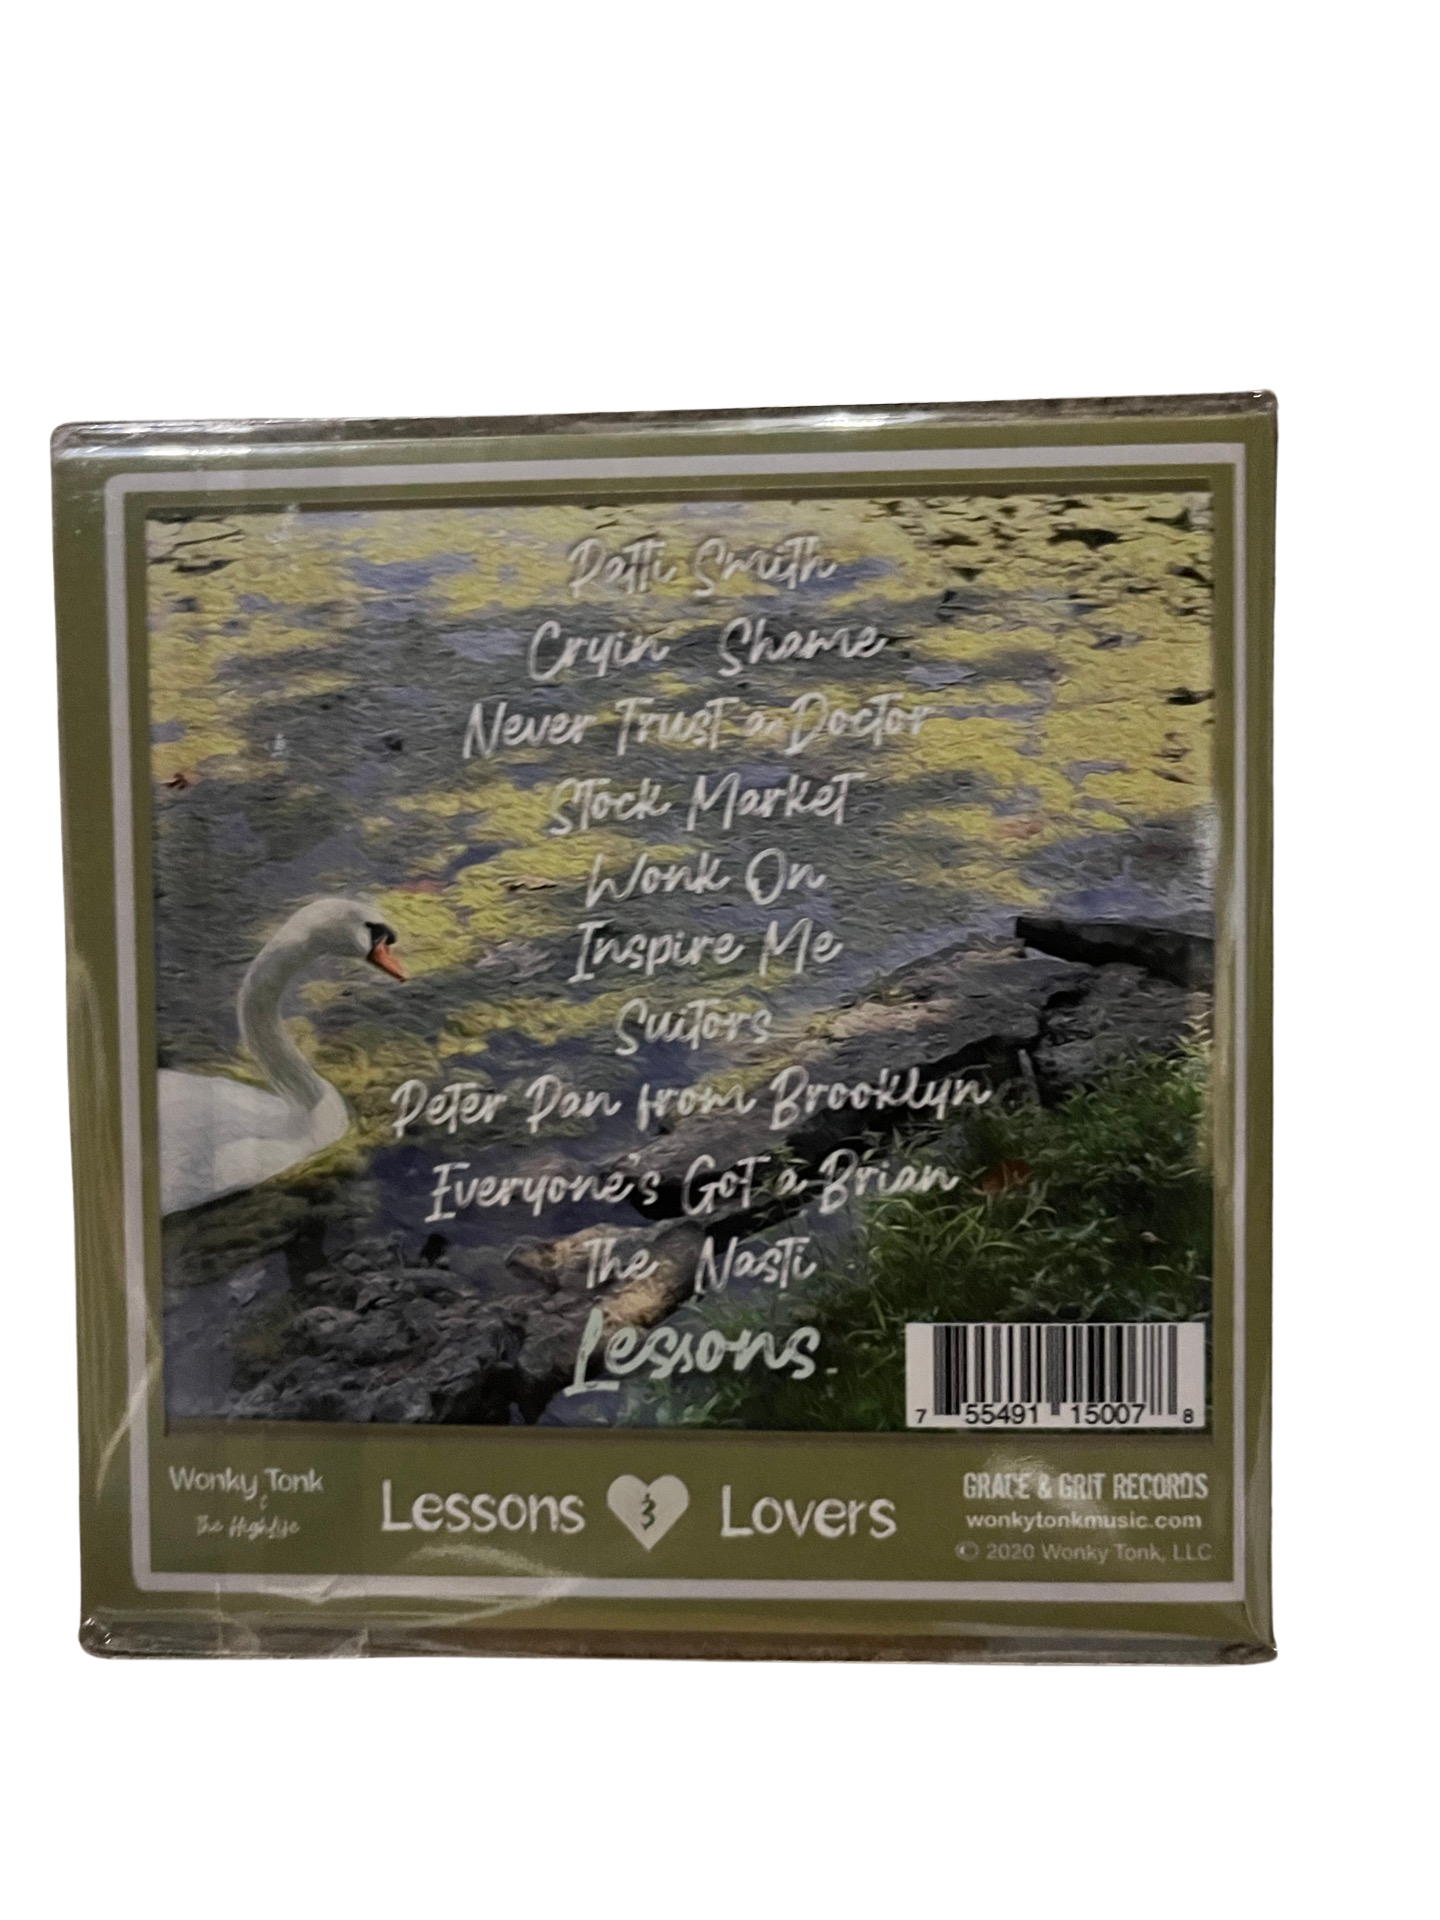 00 Lessons And Lovers CD